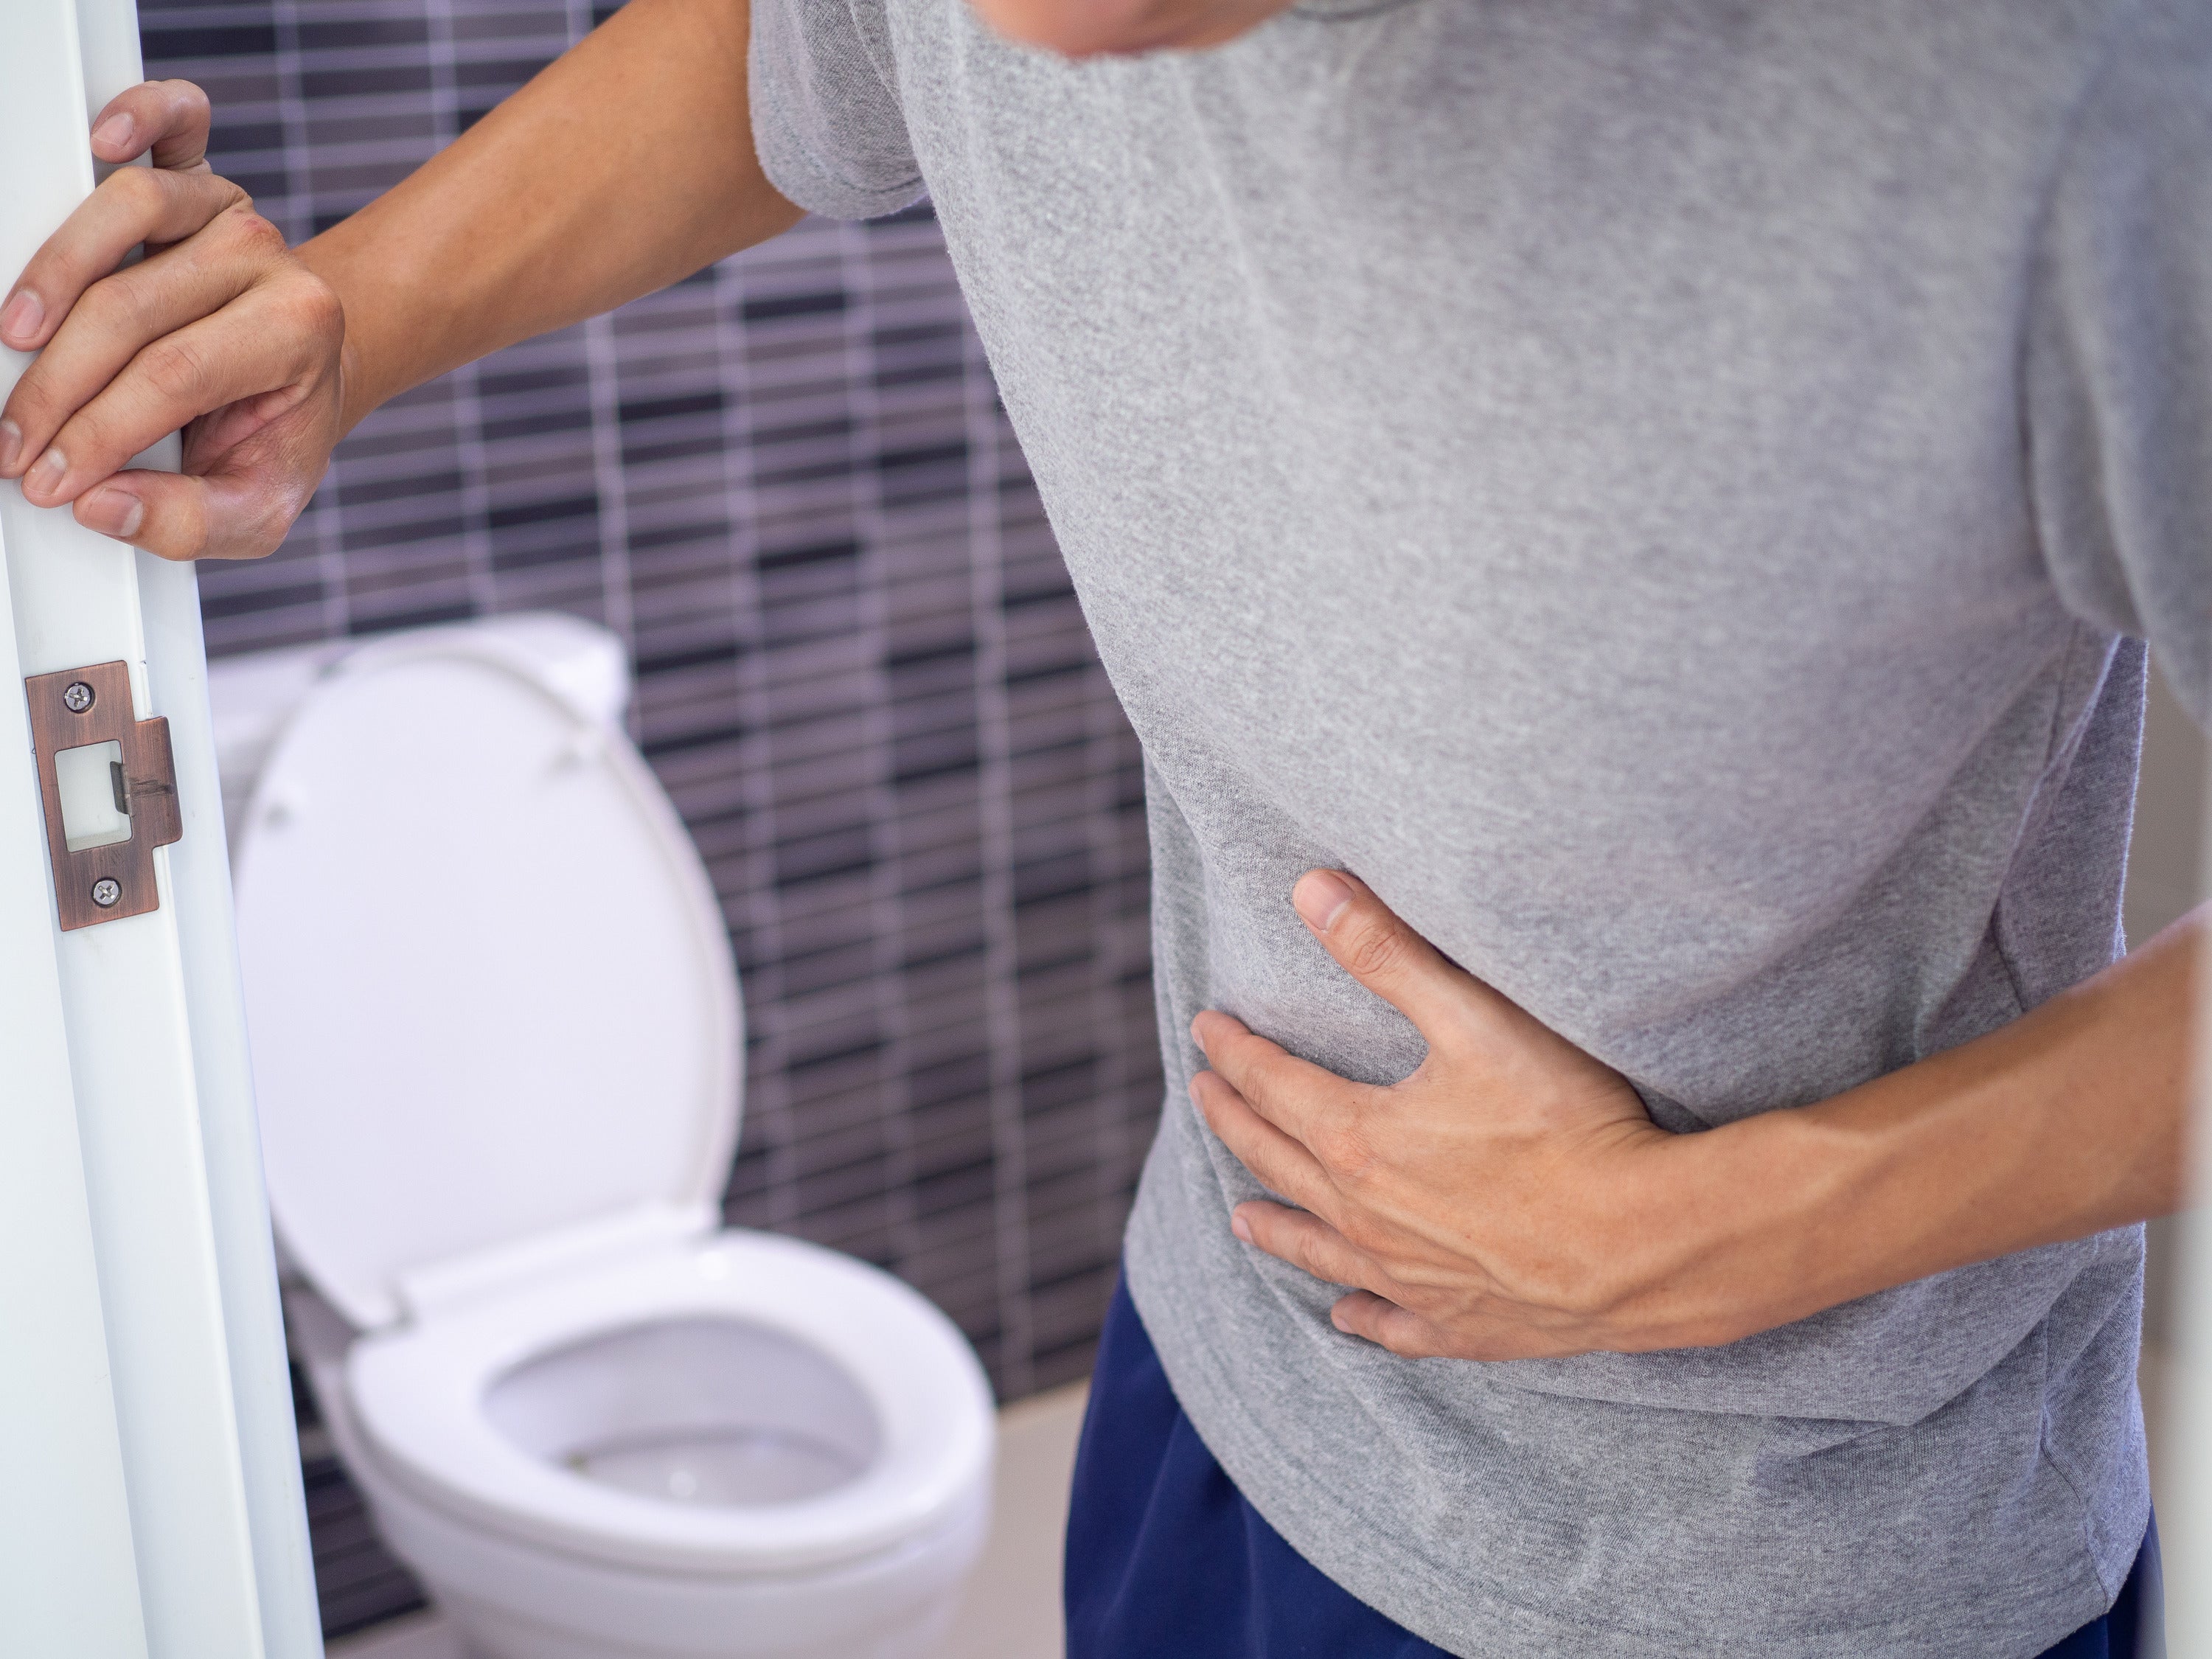 The 14 possible complications of insect bite diarrhea and abdominal pain